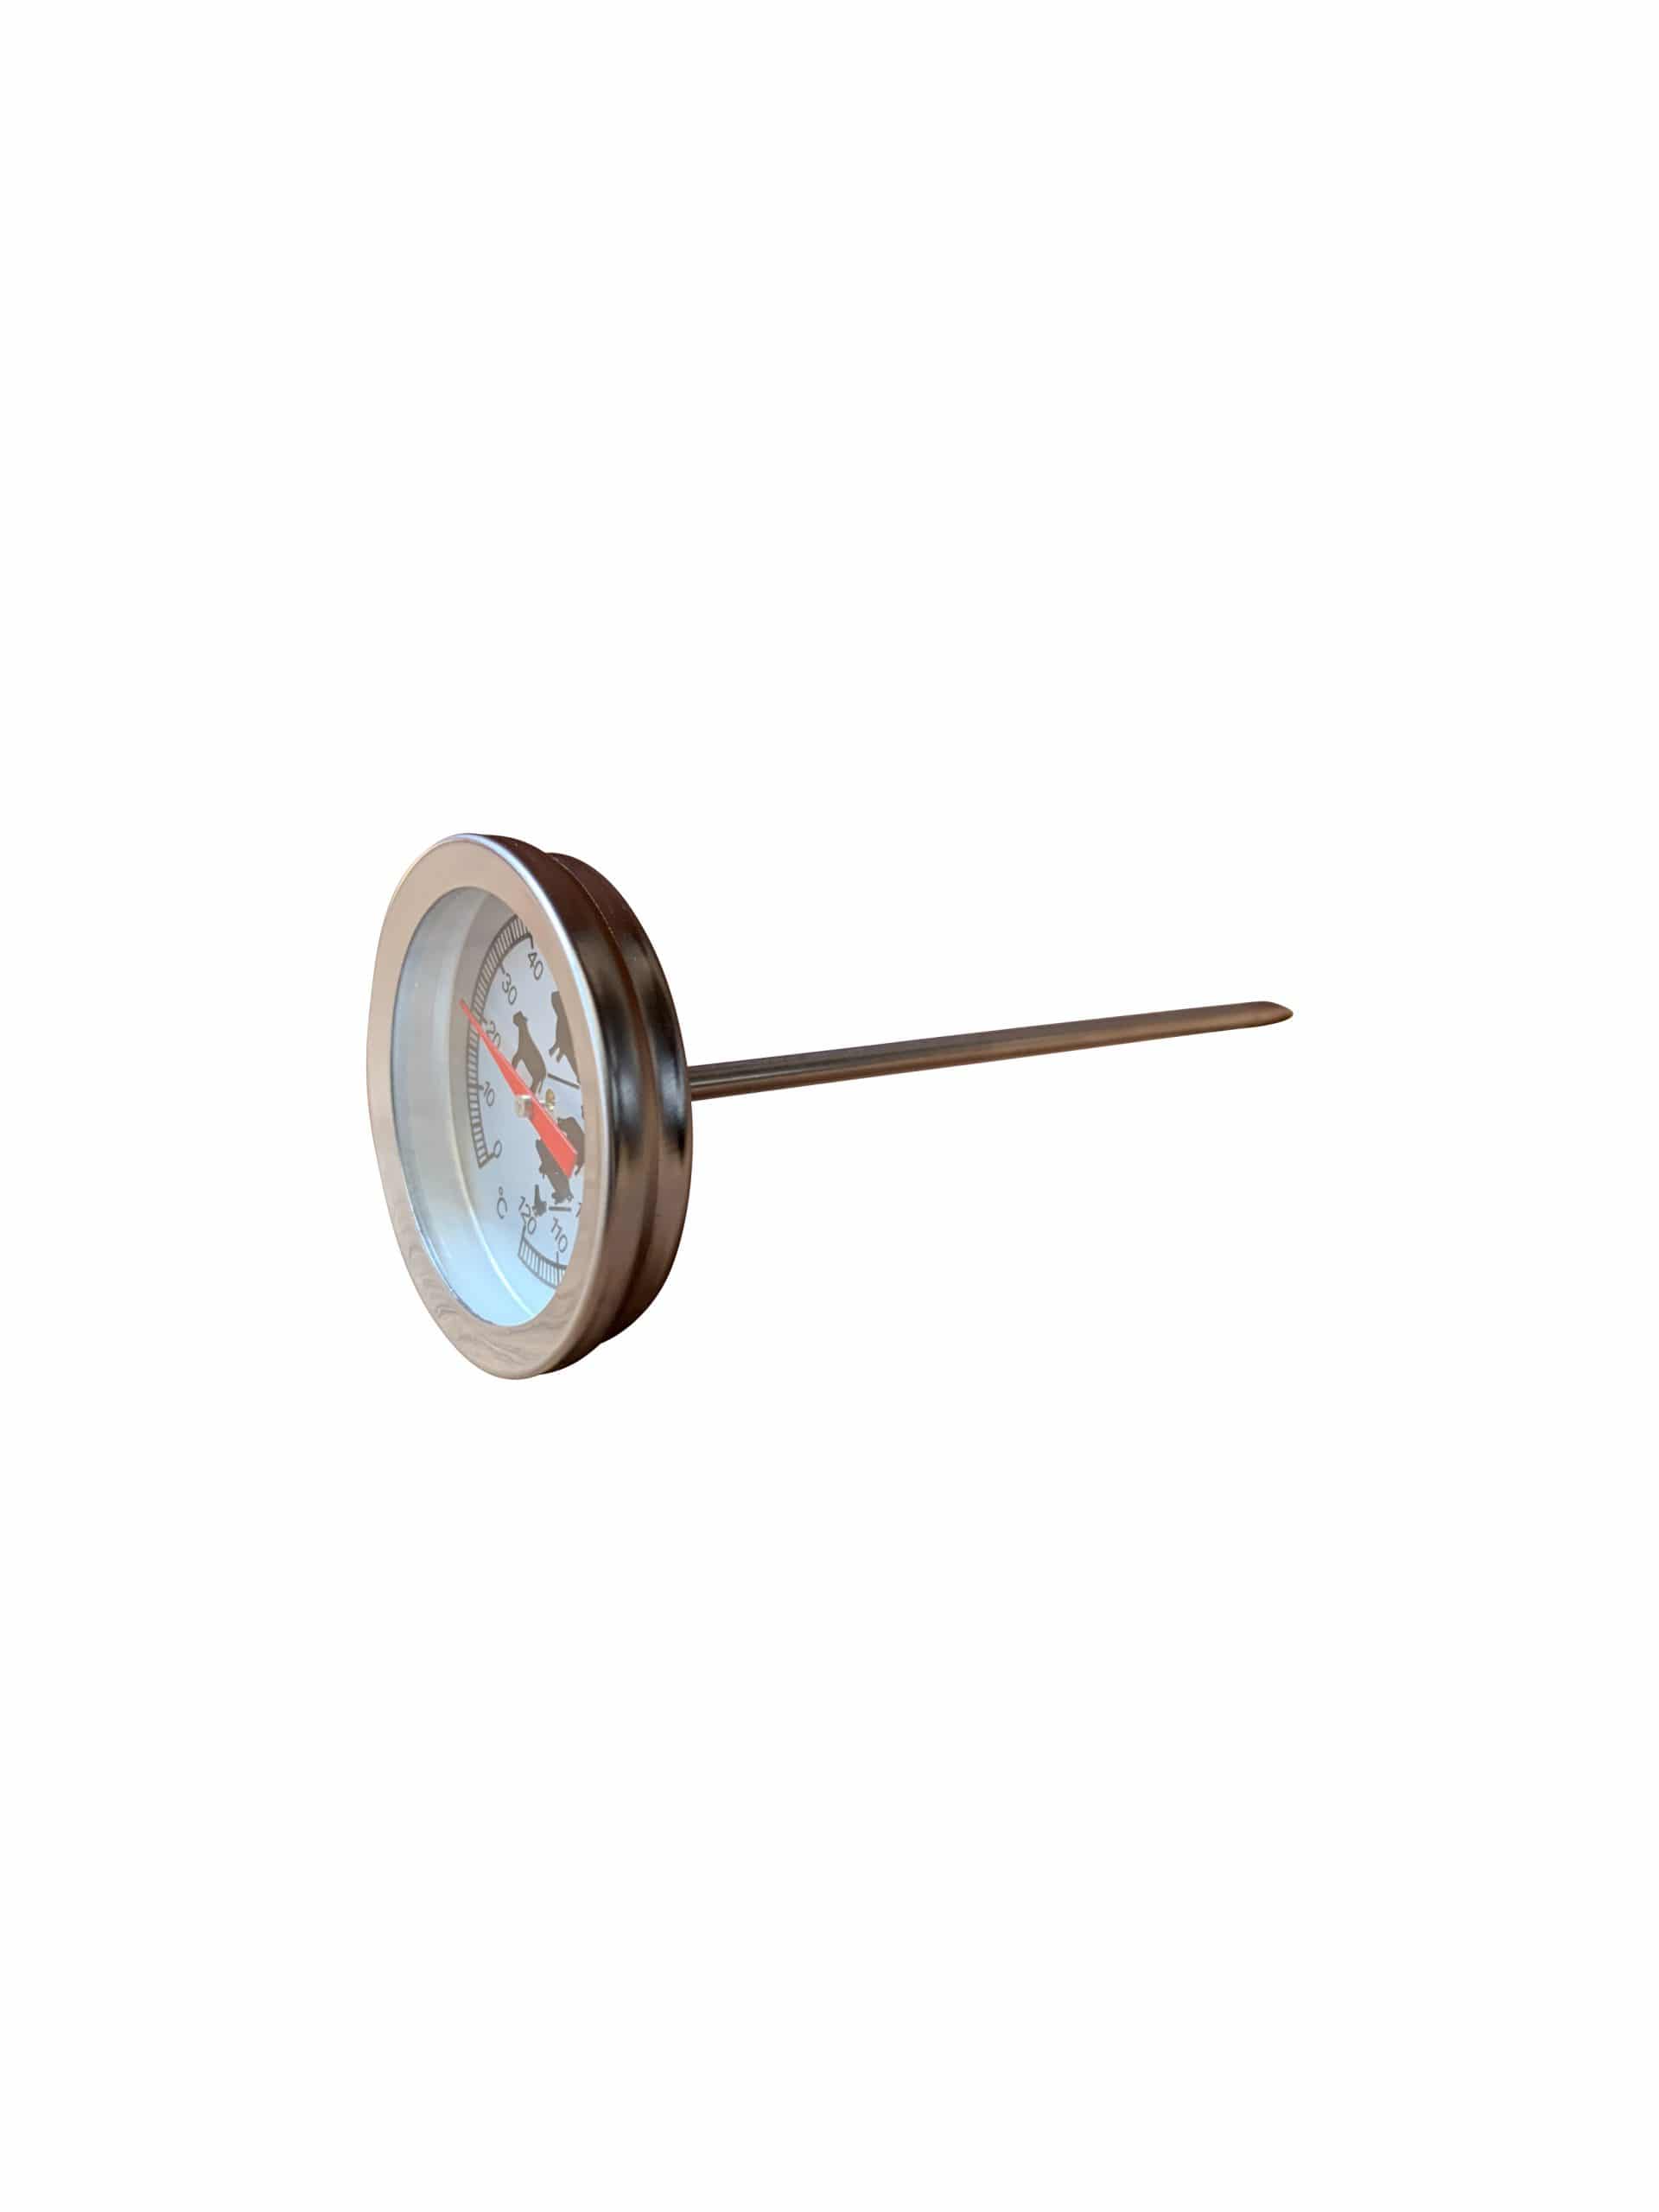 Simple Meat Thermometer